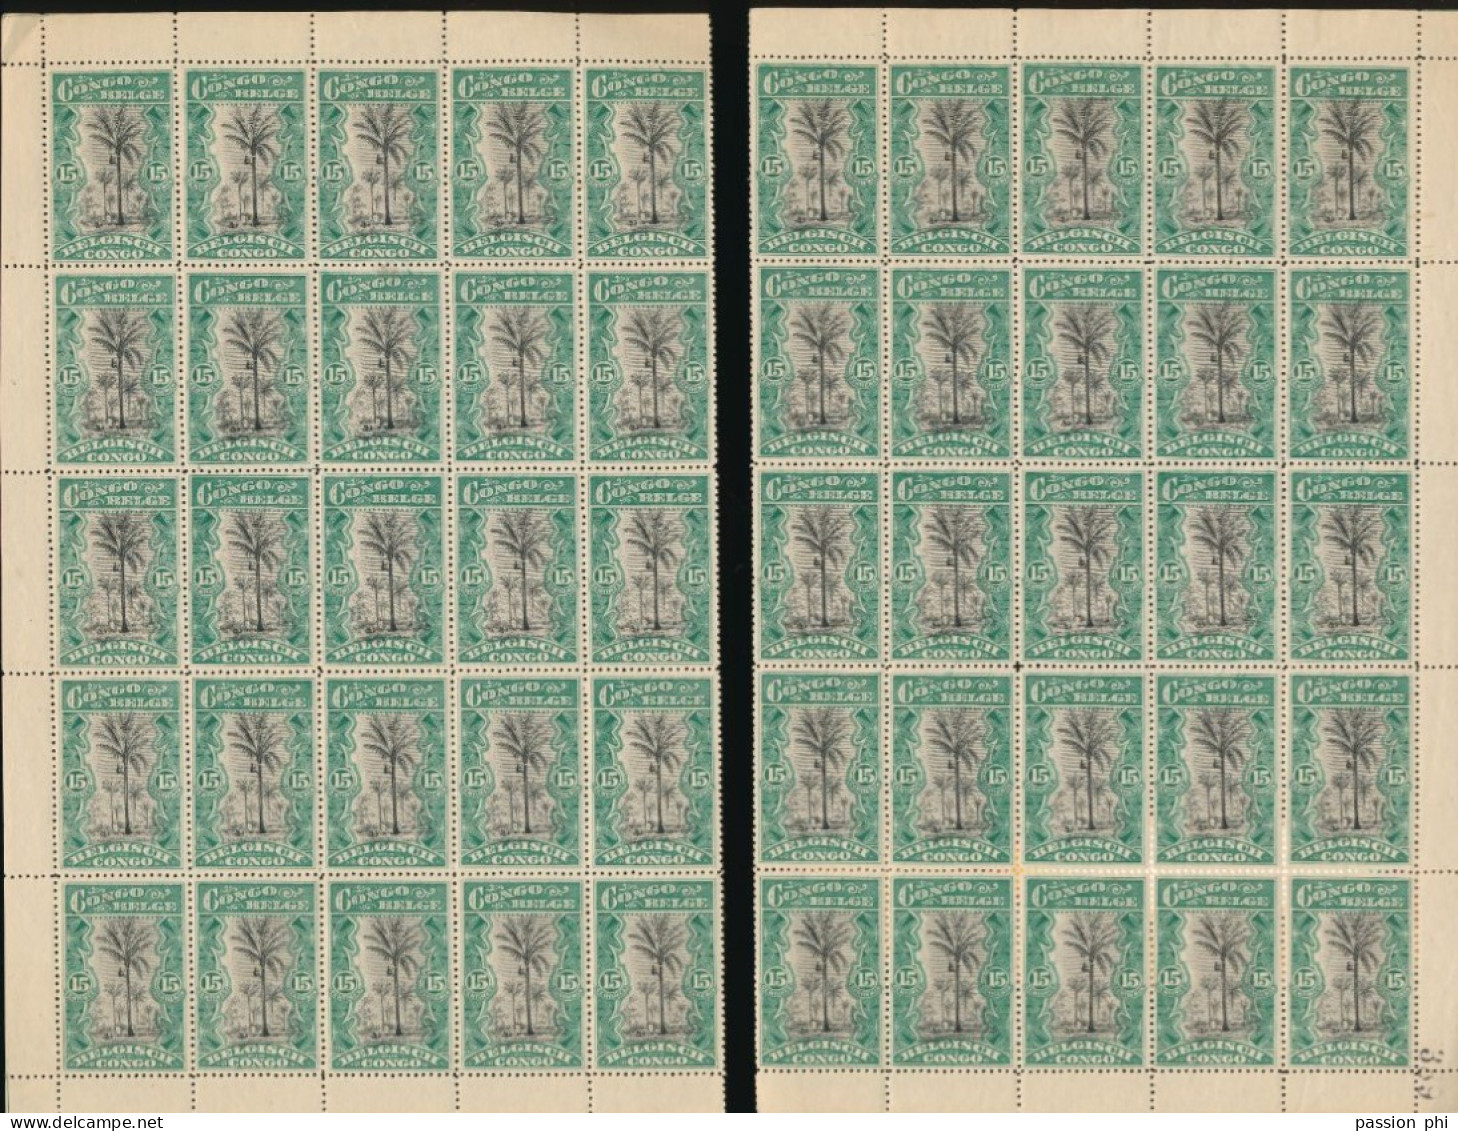 BELGIAN CONGO 1915 ISSUE COB 66 TWO HALF SHEET MNH - Feuilles Complètes